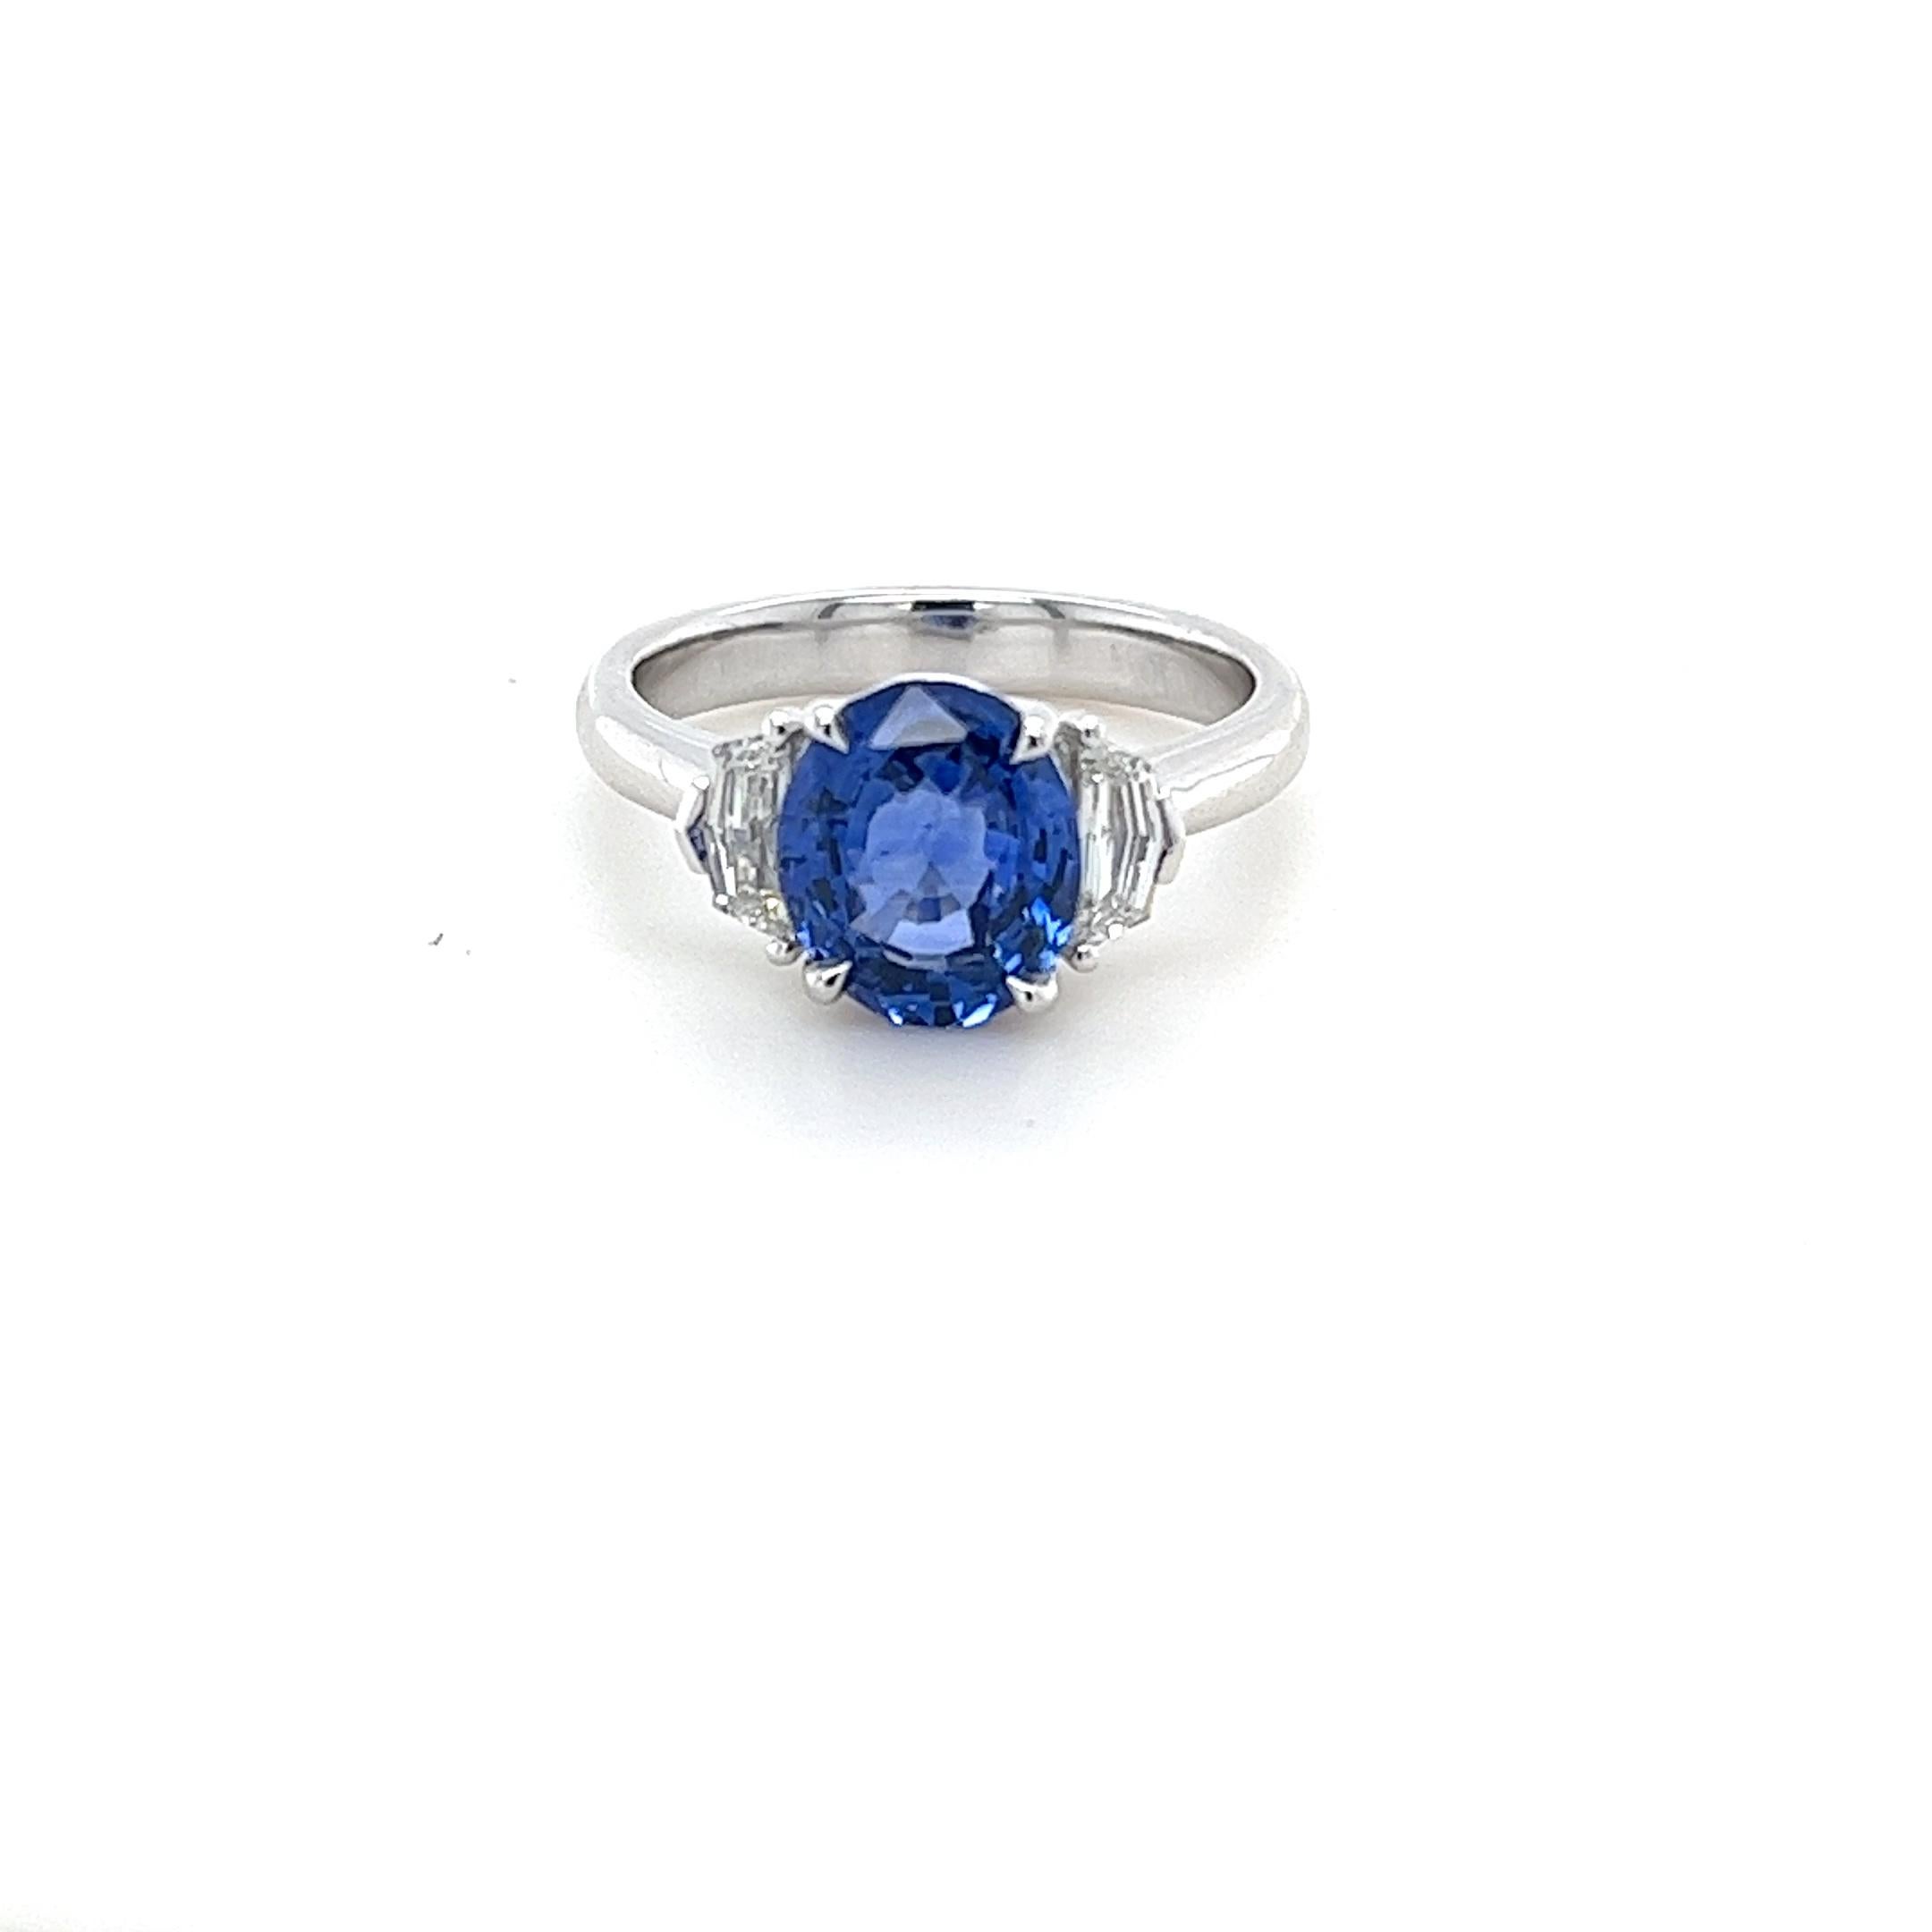 2.75 Carat Ceylon Sapphire & Diamond Ring in Platinum In New Condition For Sale In Great Neck, NY